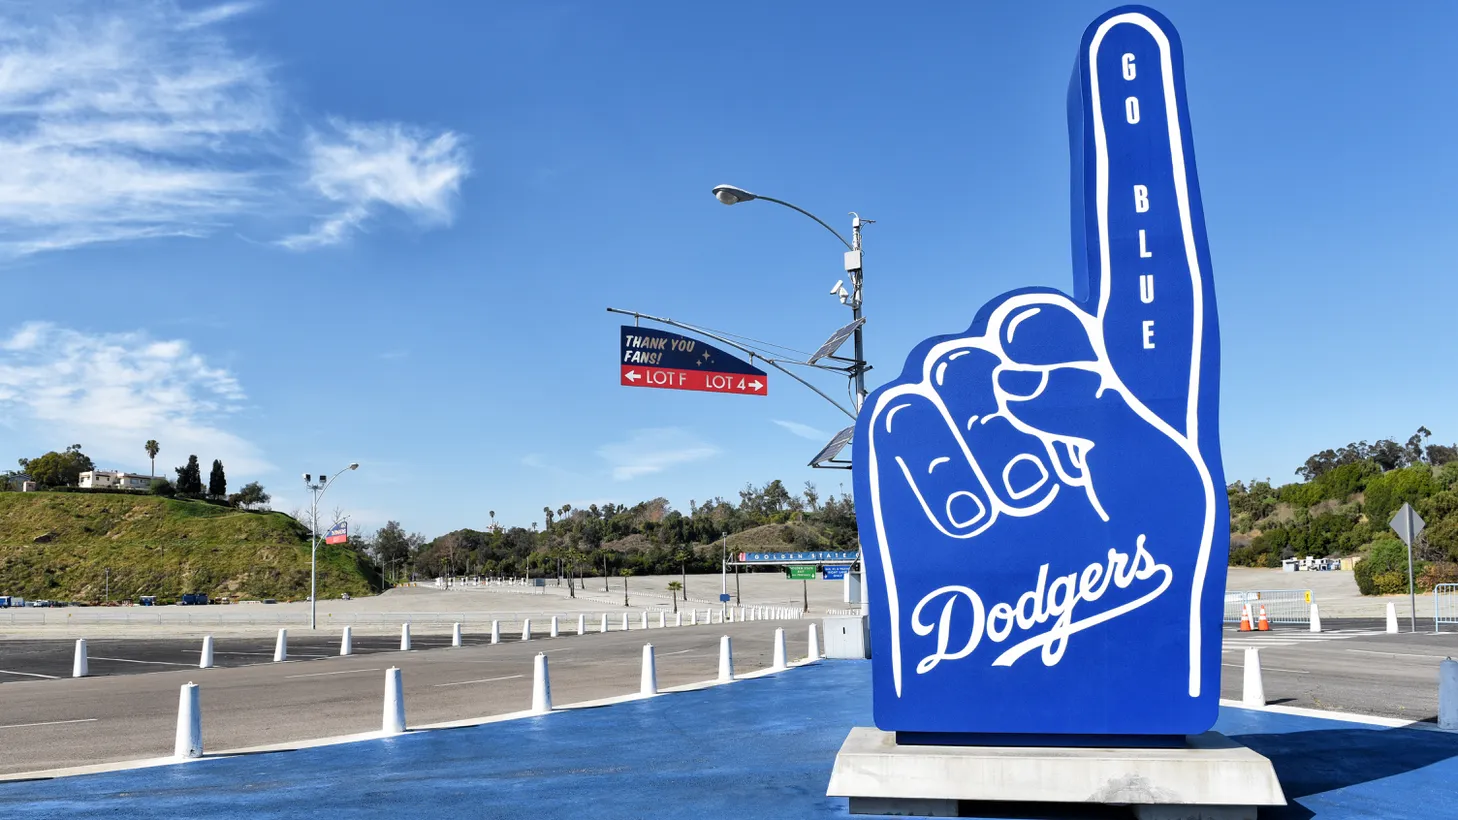 The Dodgers’ expectations are to compete for the World Series every year, says Petros Papadakis, co-host of Petros and Money on AM 570 LA Sports.